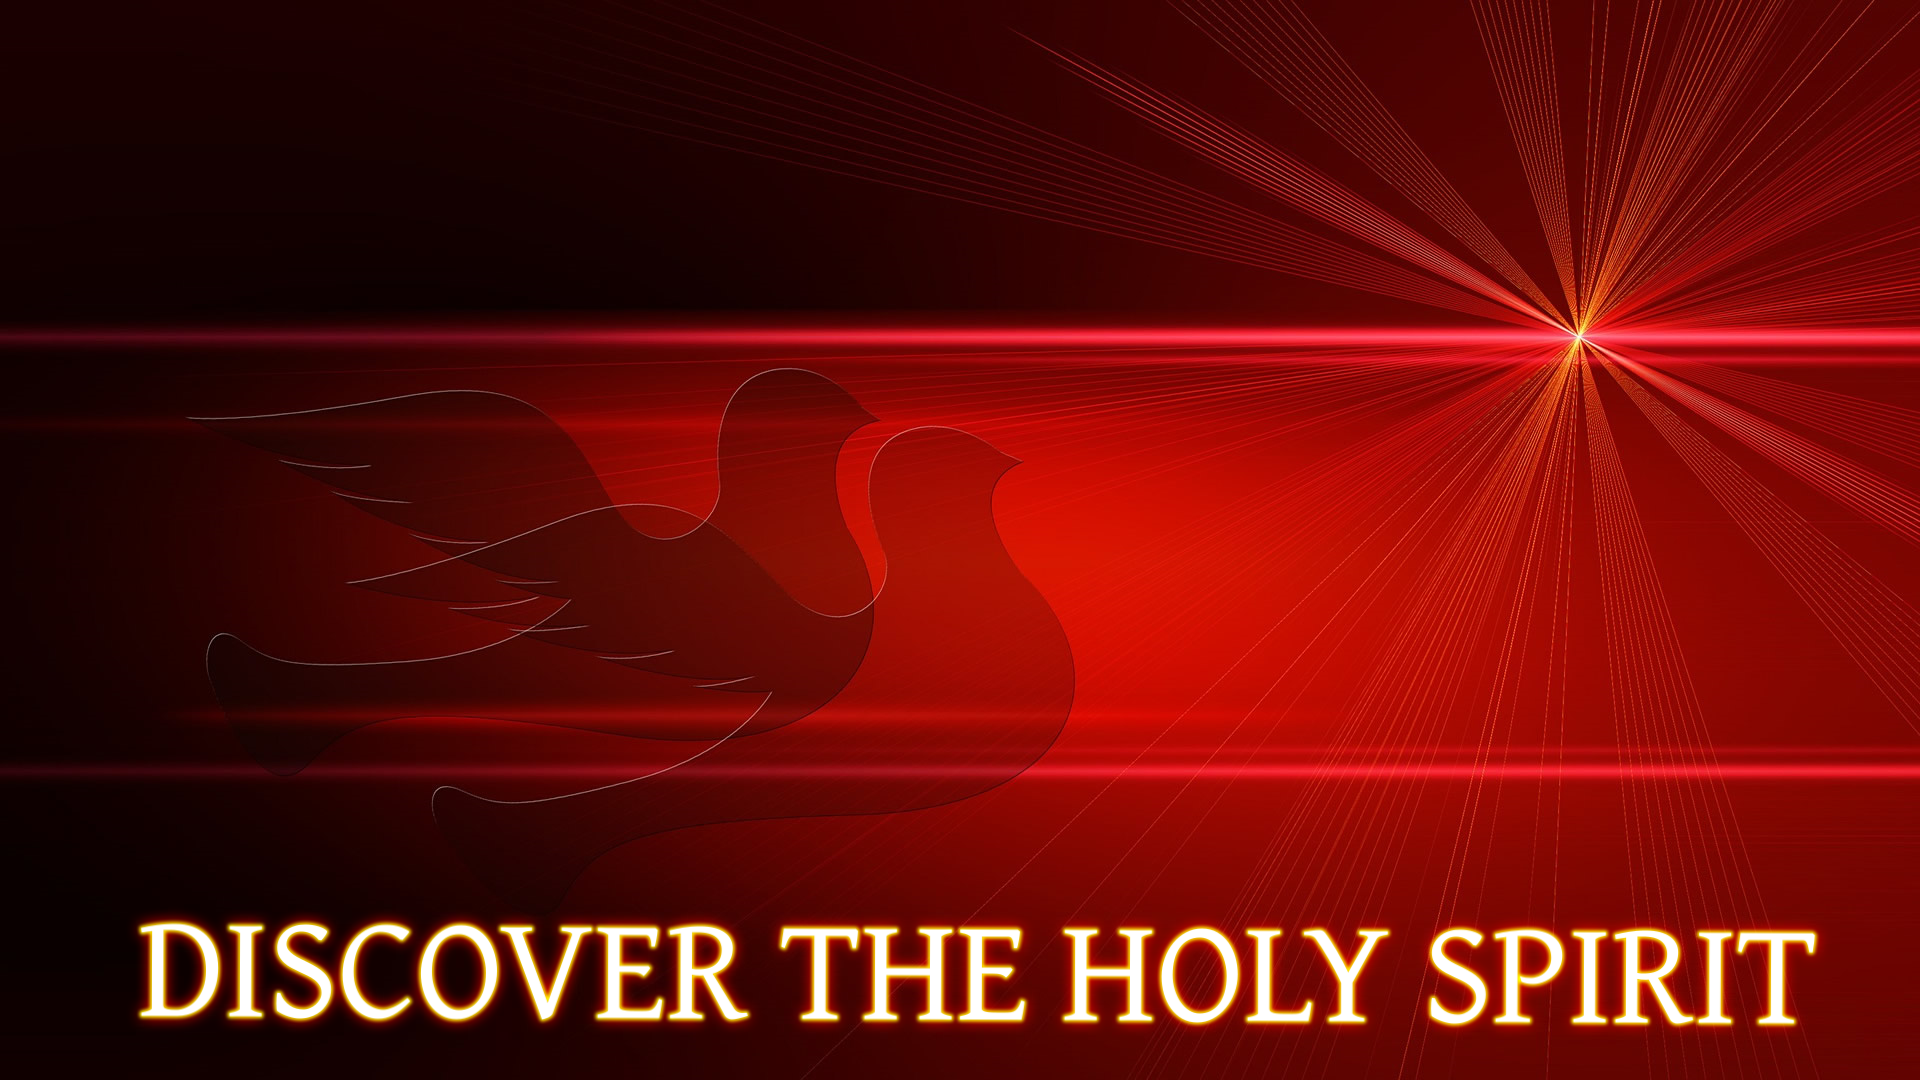 Embracing the Holy Spirit